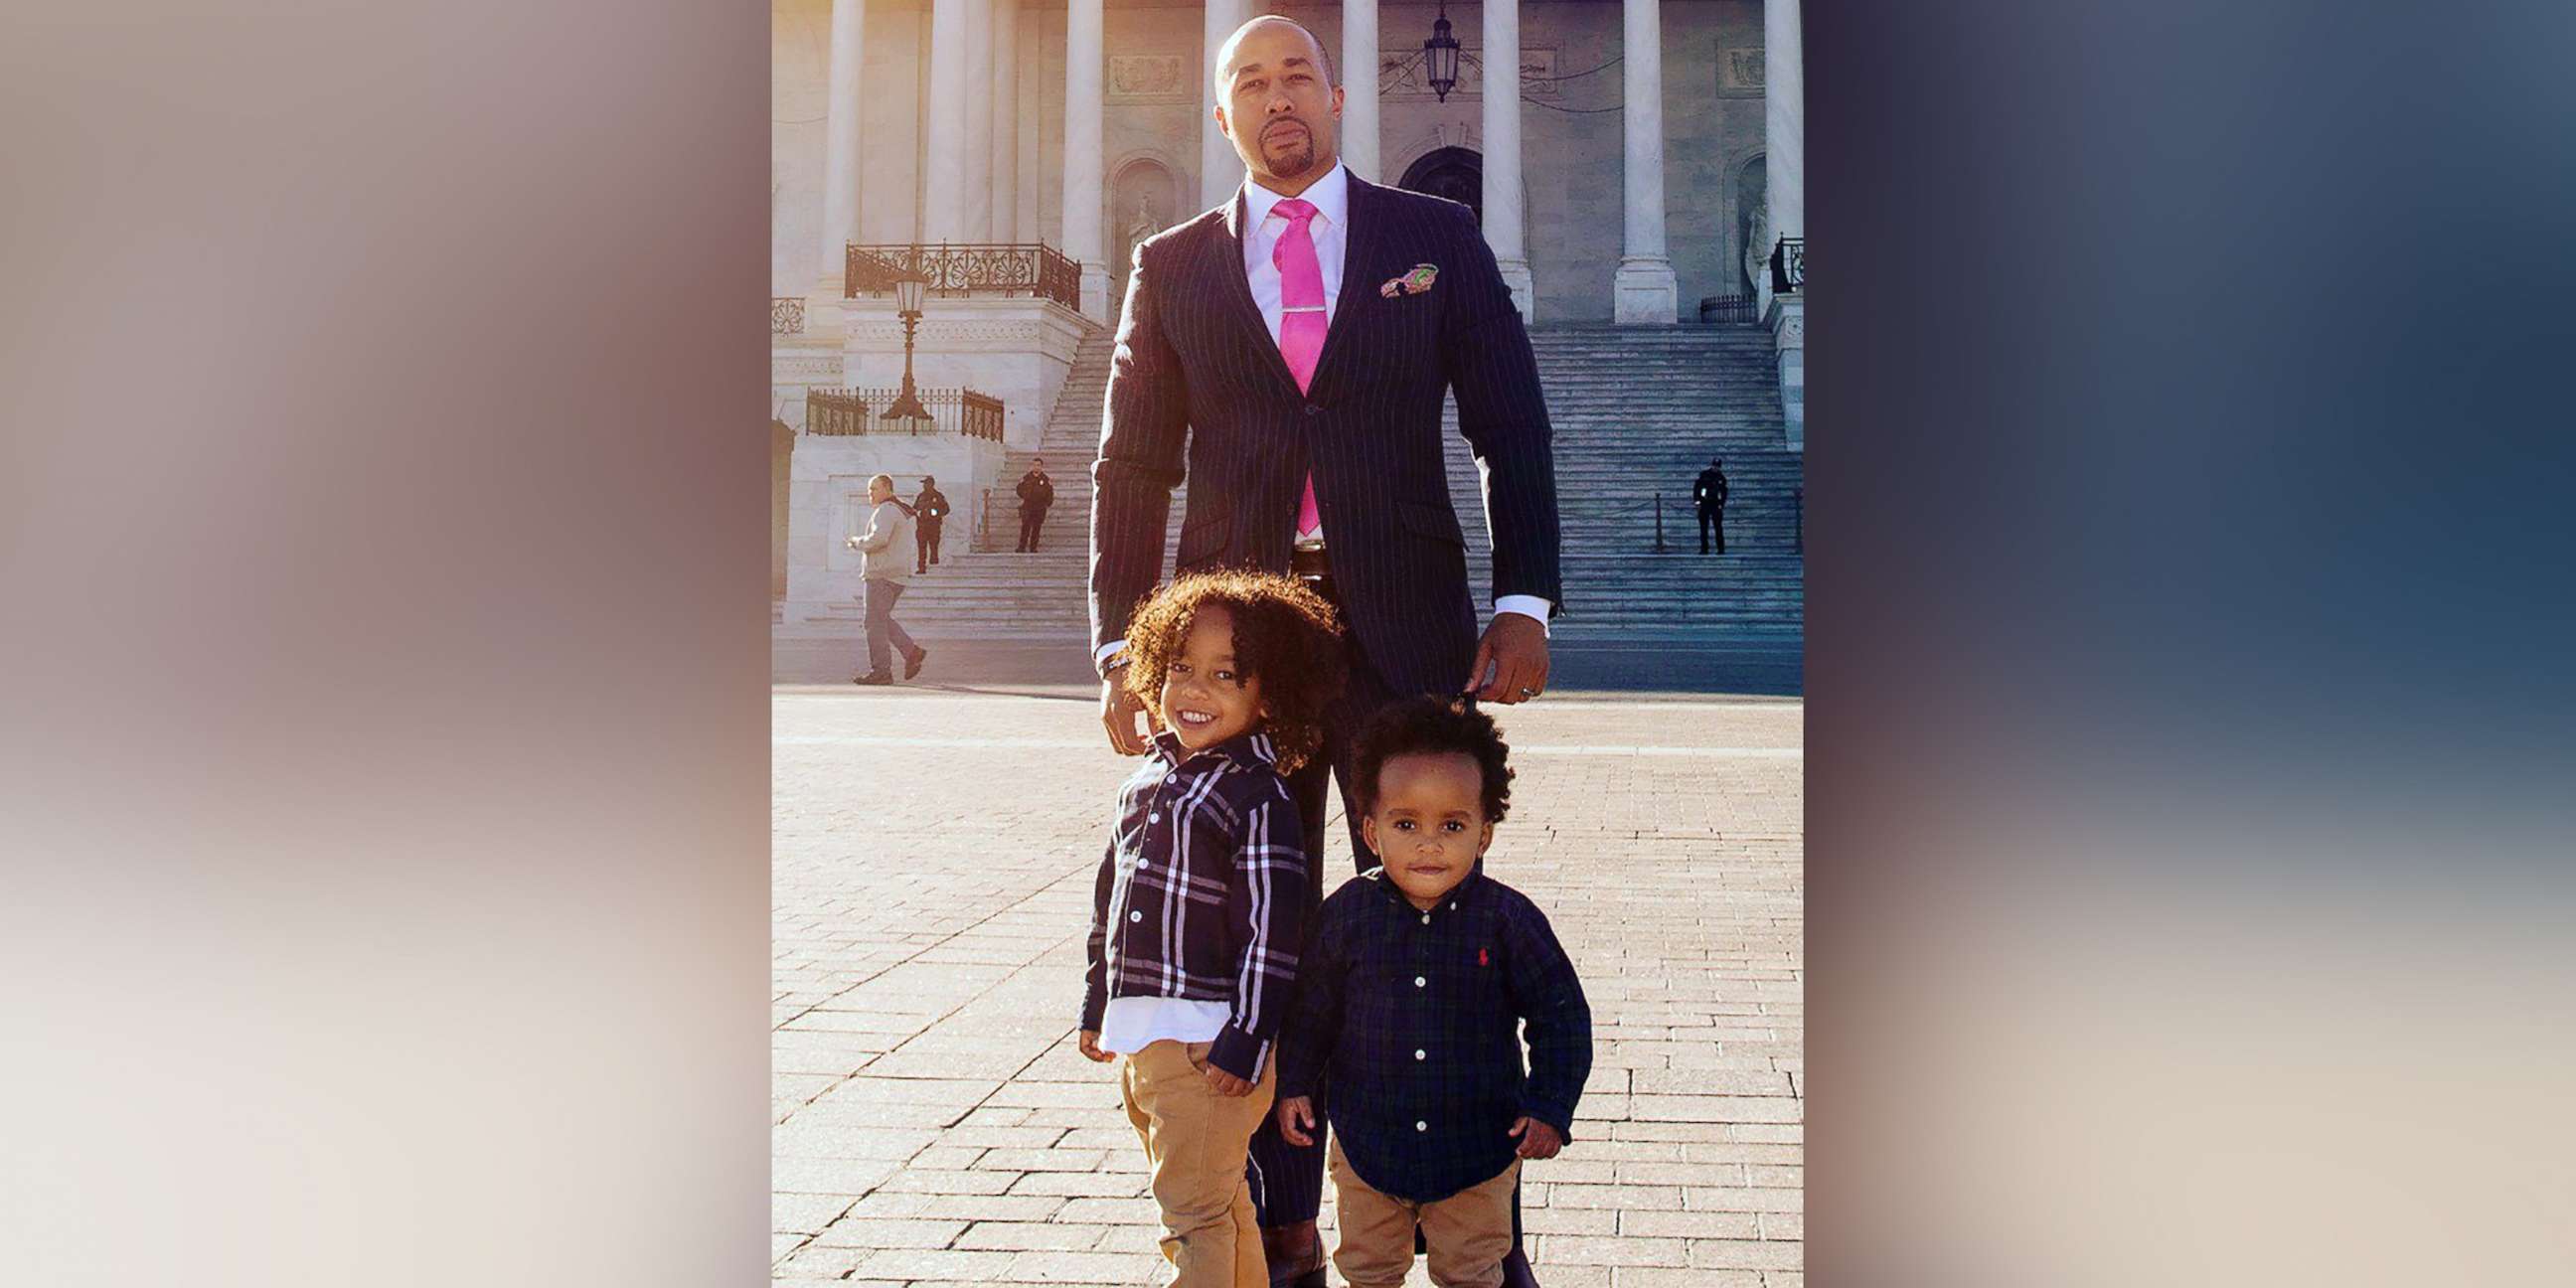 PHOTO: Charles Johnson poses for a photo with his sons Charles V and Langston Johnson in Washington, D.C. on Sept. 11, 2018, after the death of his wife Kira.